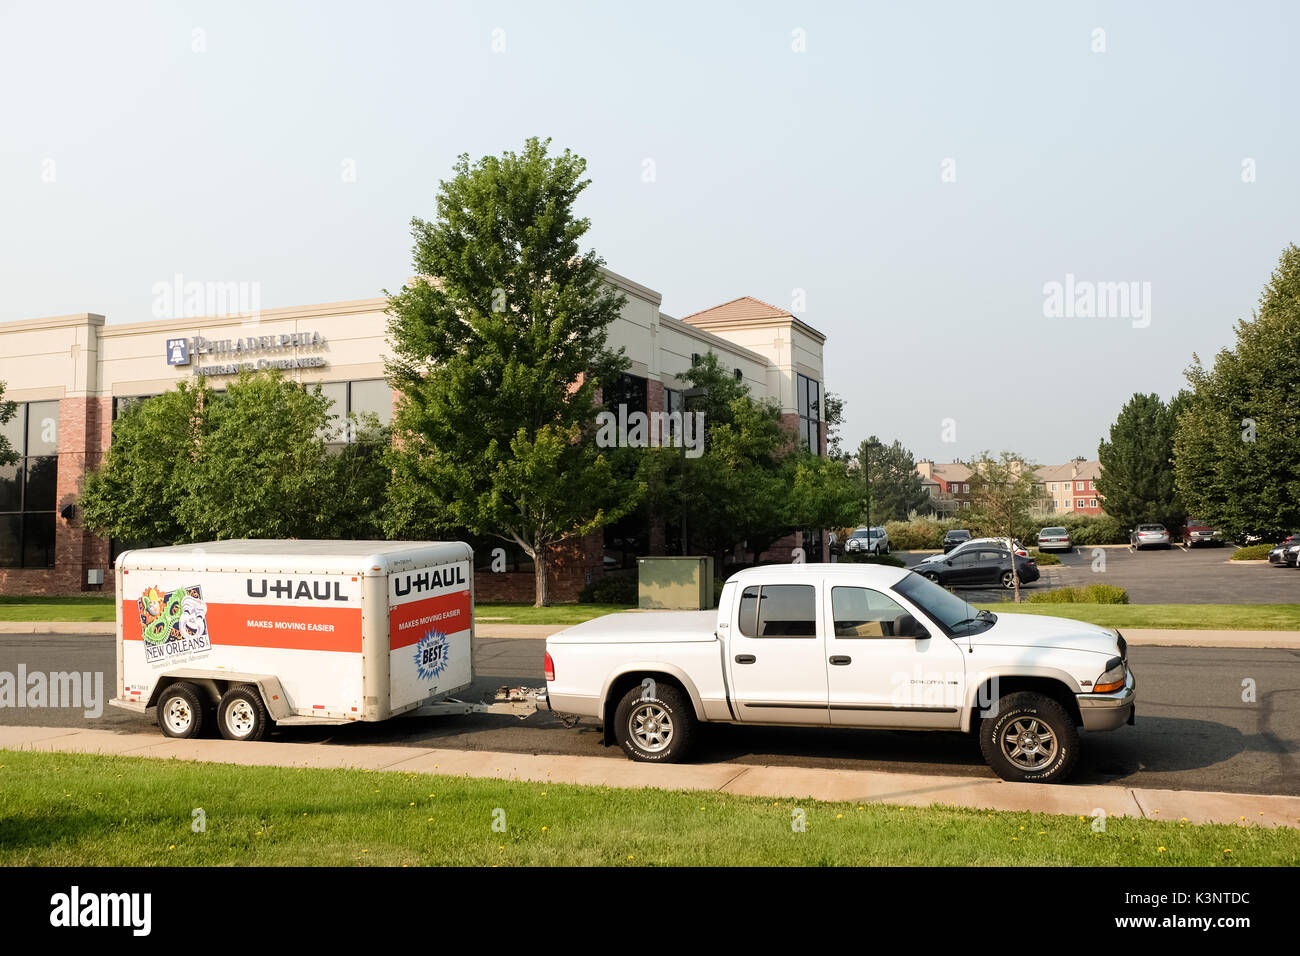 Denver, Colorado, USA - August 7,2017: U-Haul cargo trailer at a street. U-Haul truck is a moving equipment and storage rental company. Stock Photo